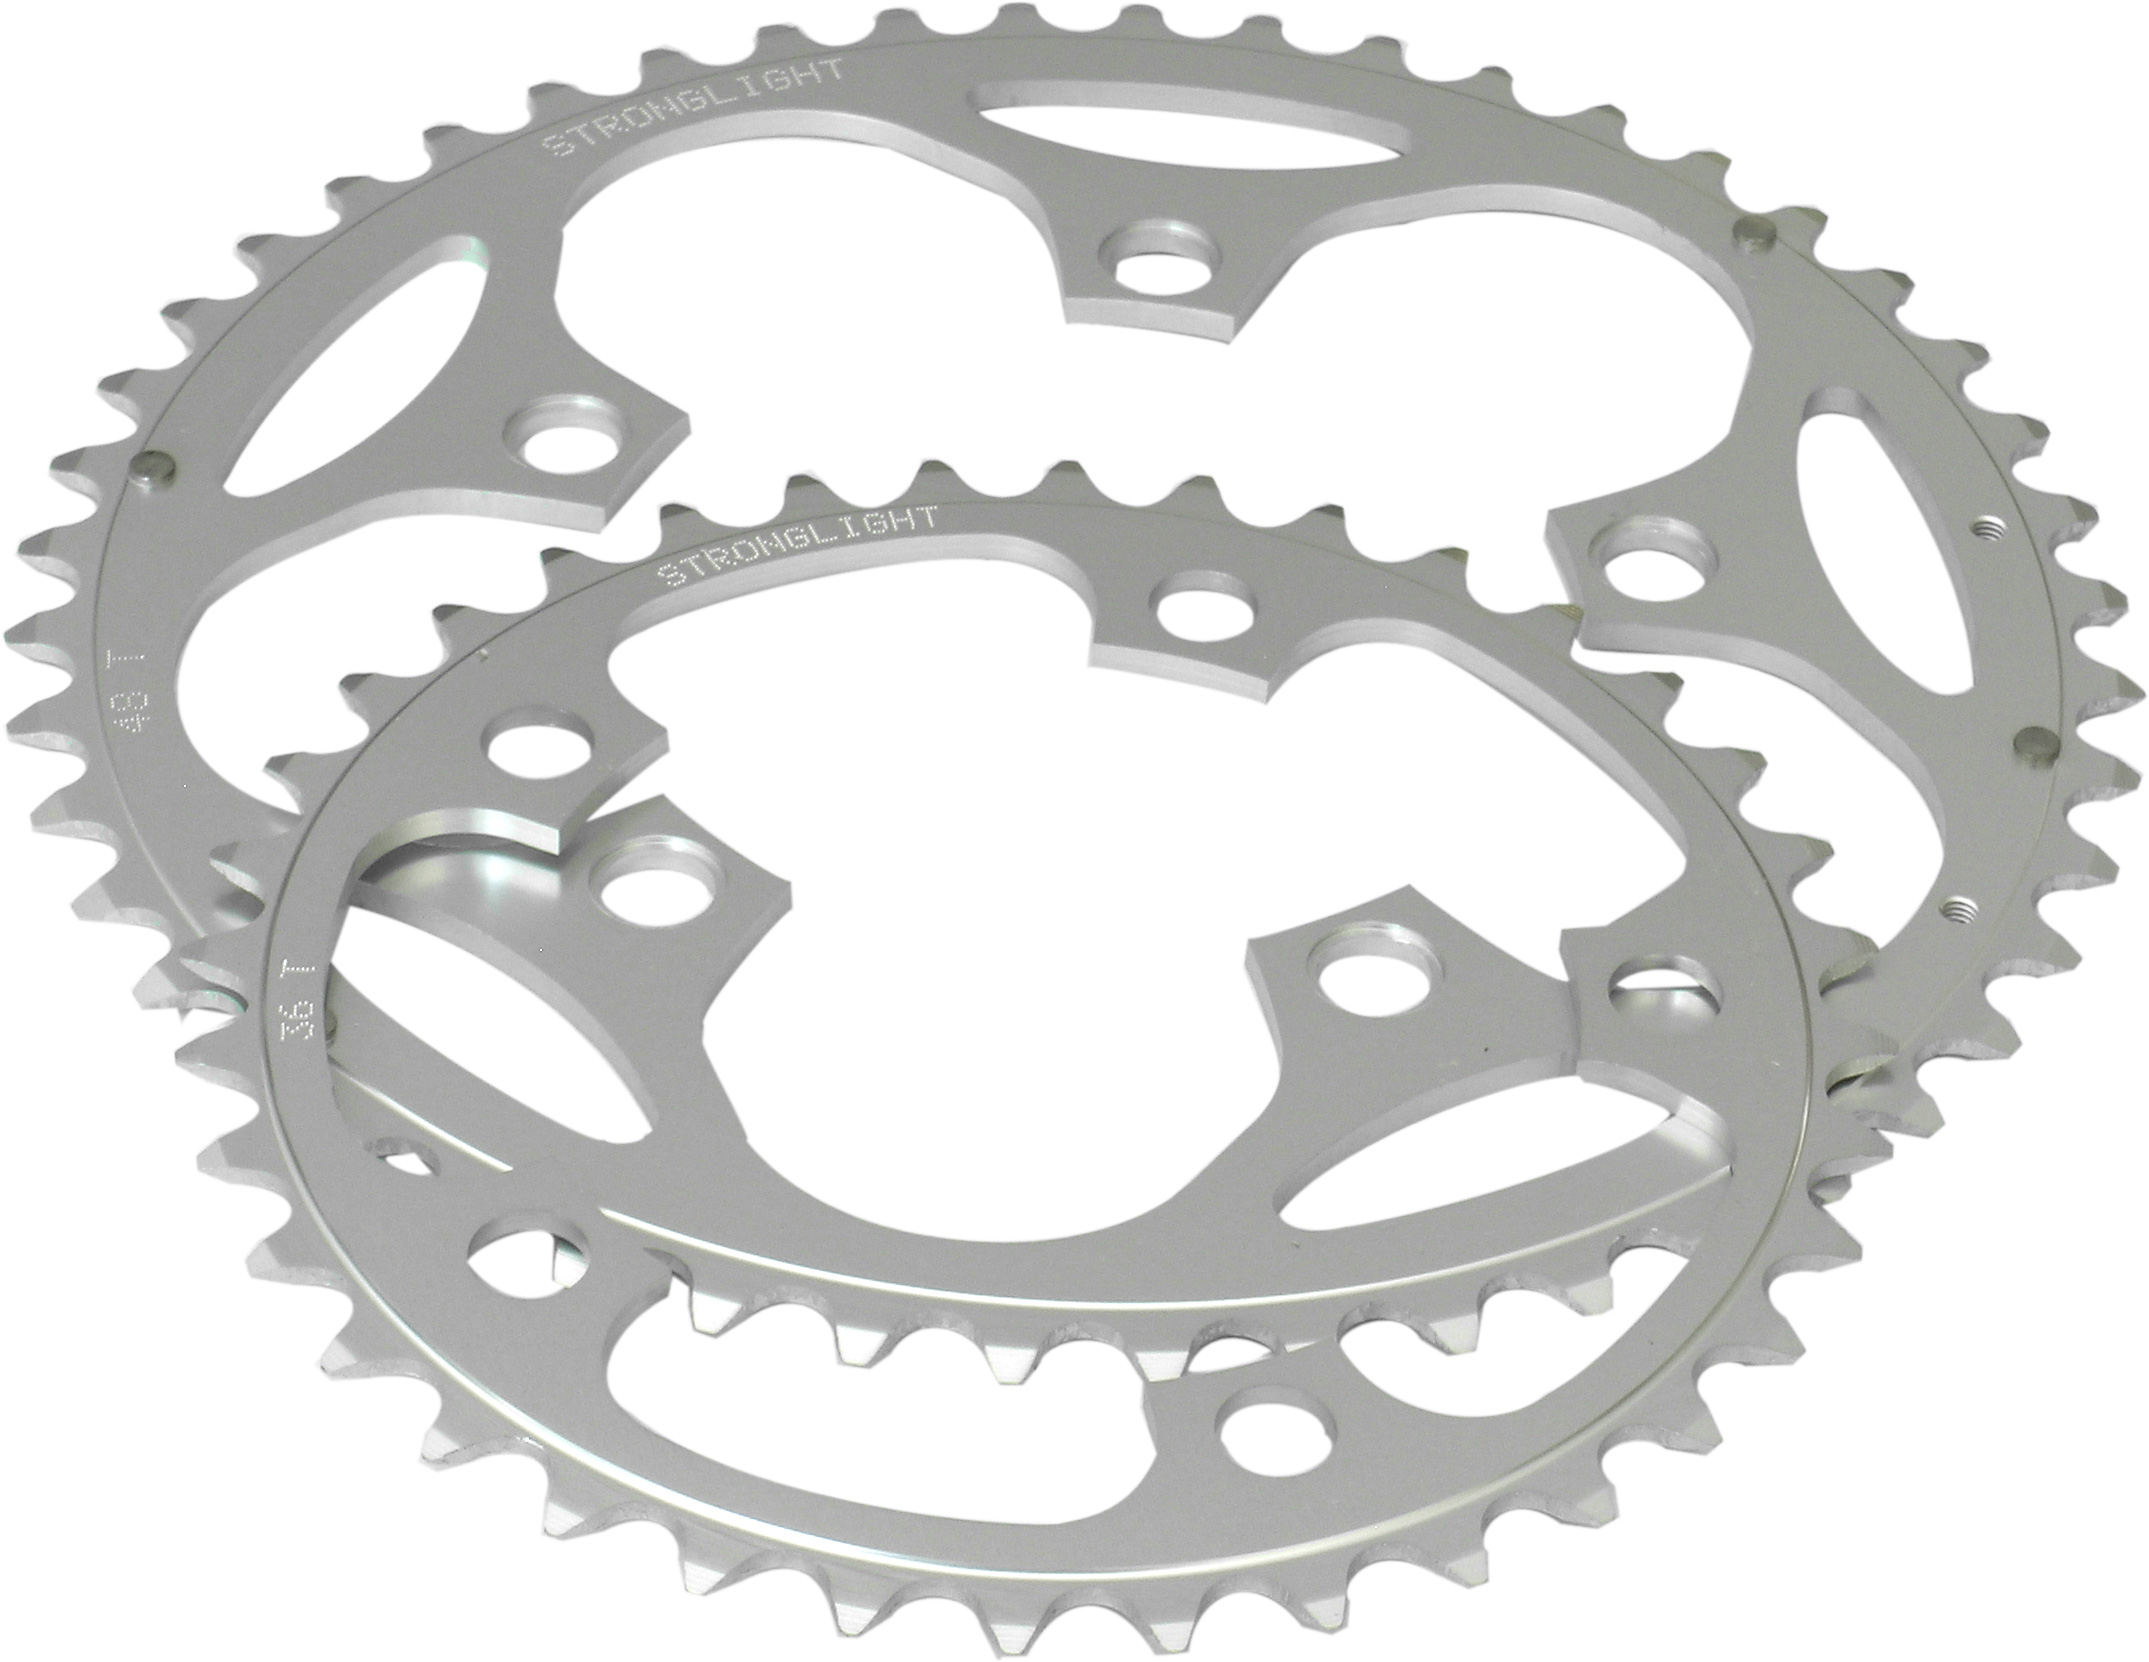 RD13539 Stronglight 39T 5-Arm/135mm Chainring